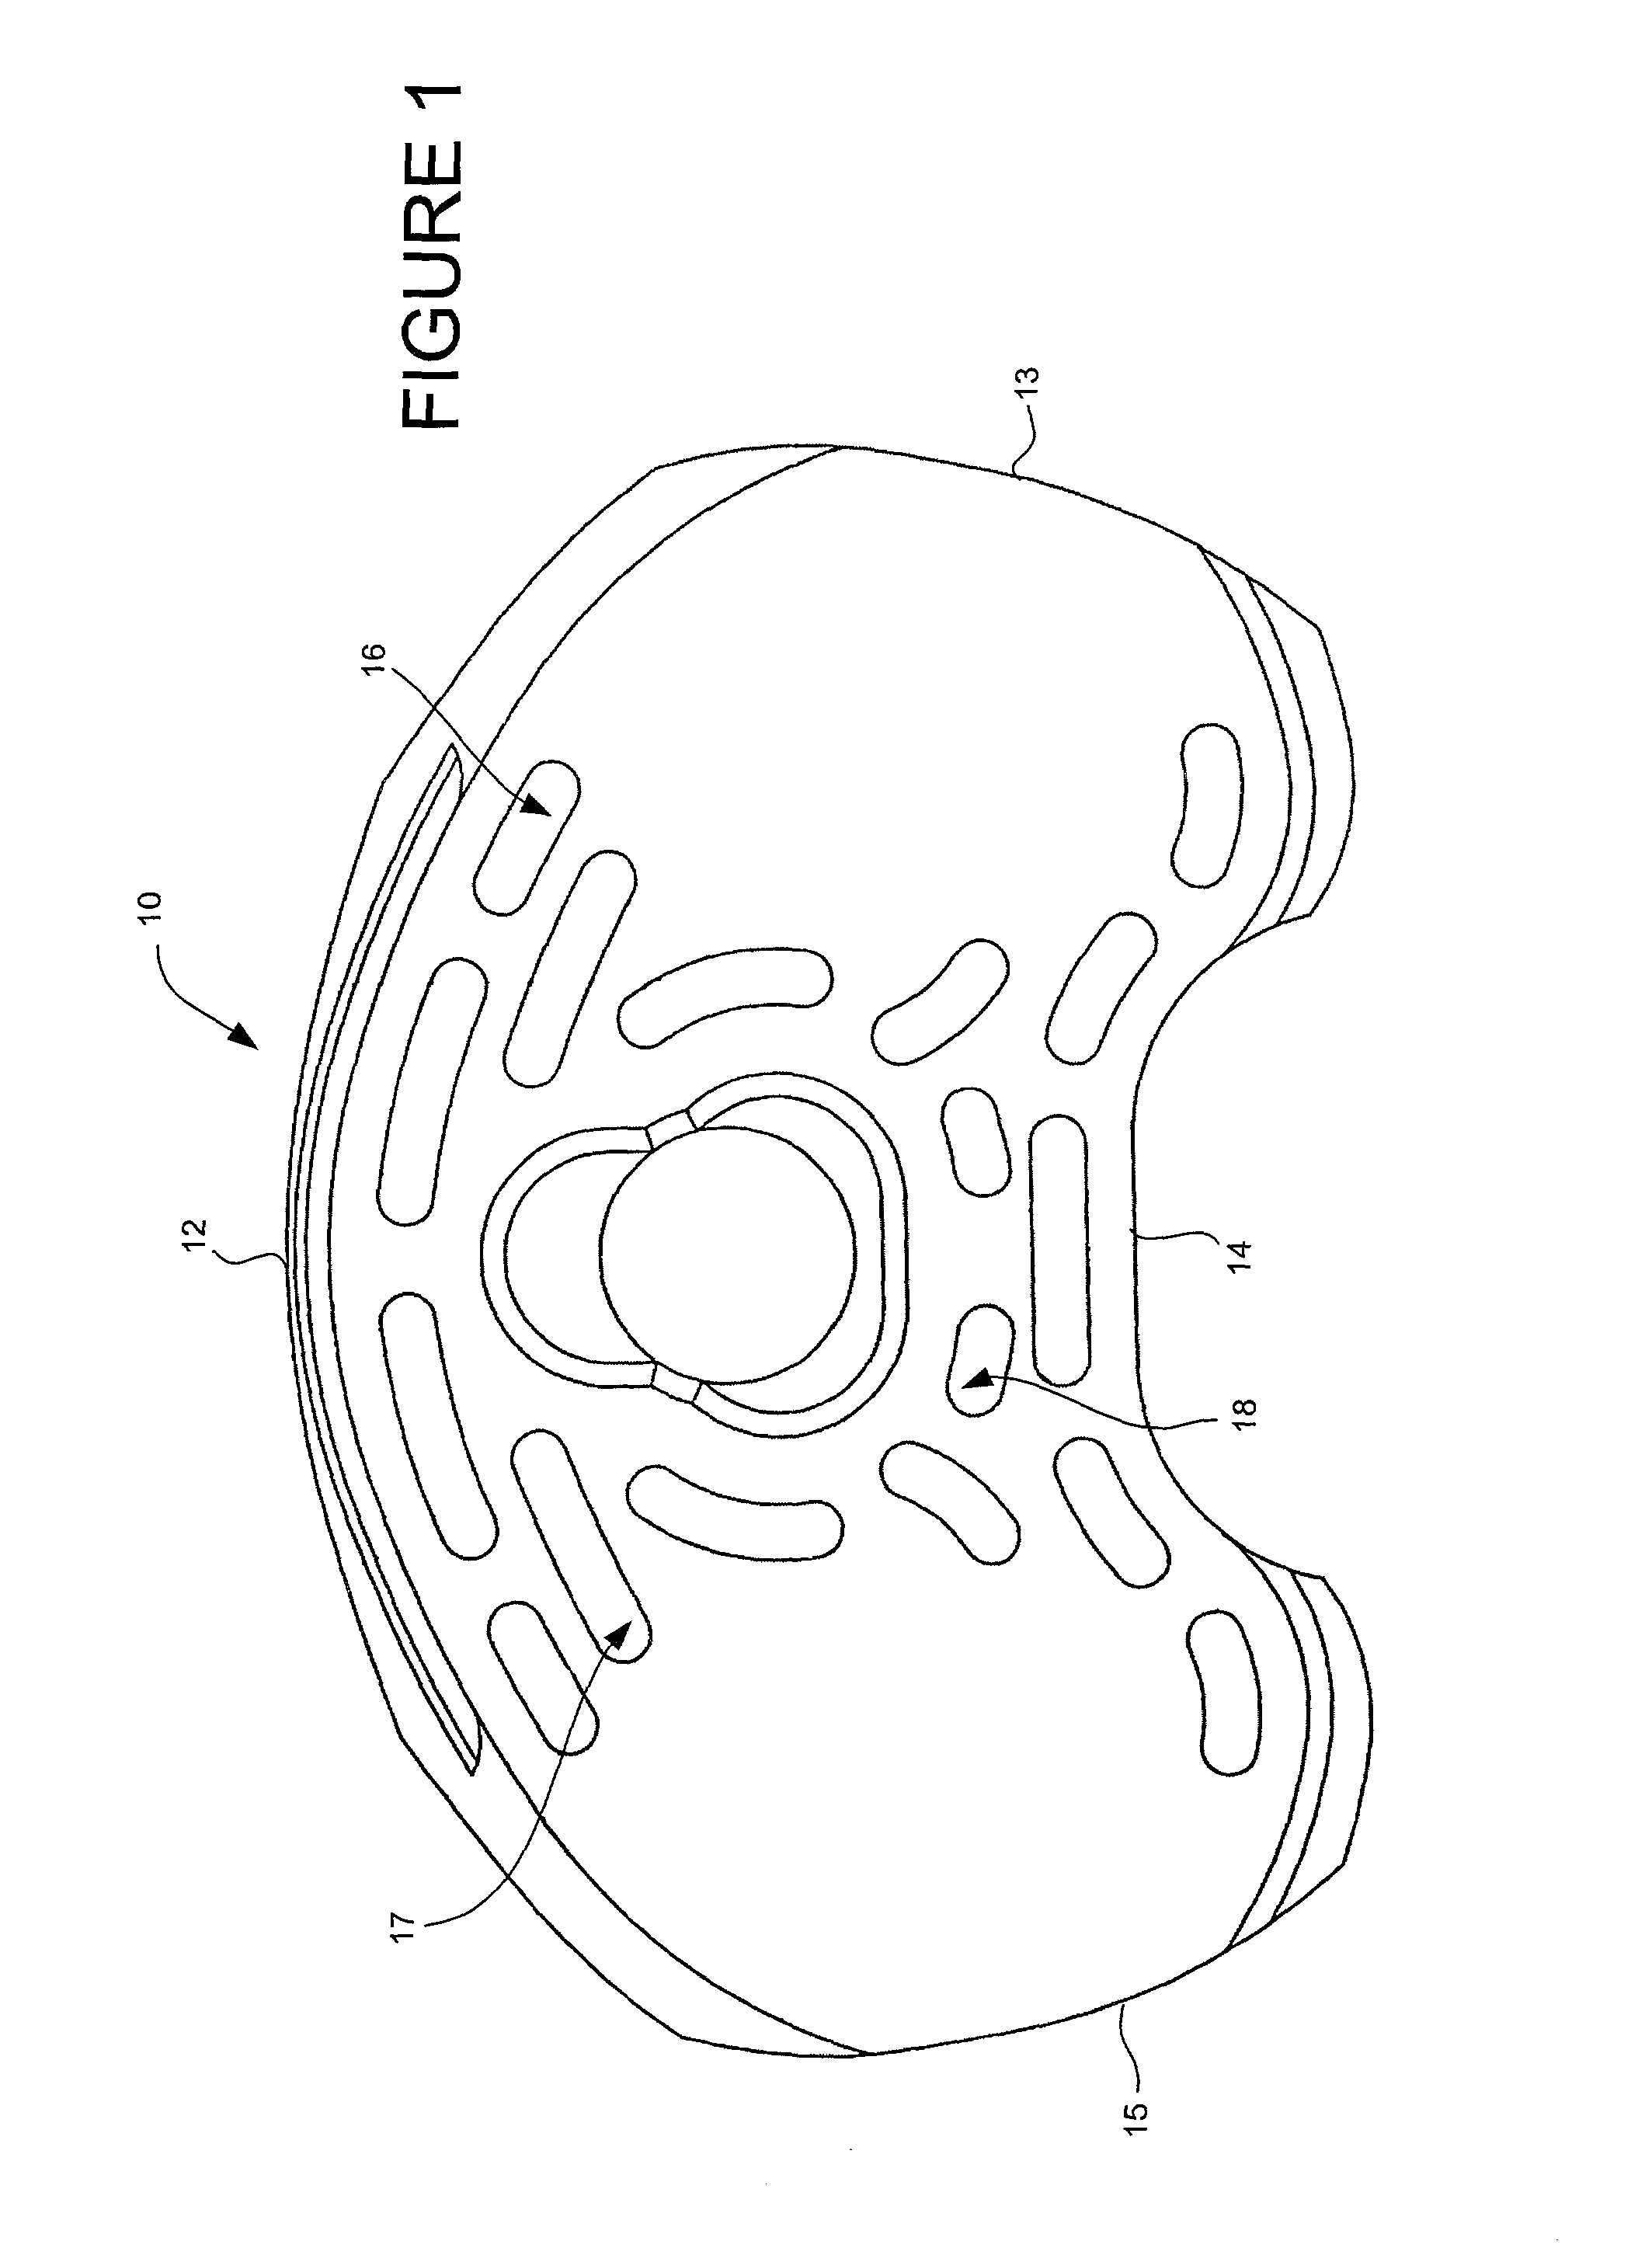 Surfaces and processes for wear reducing in orthopaedic implants